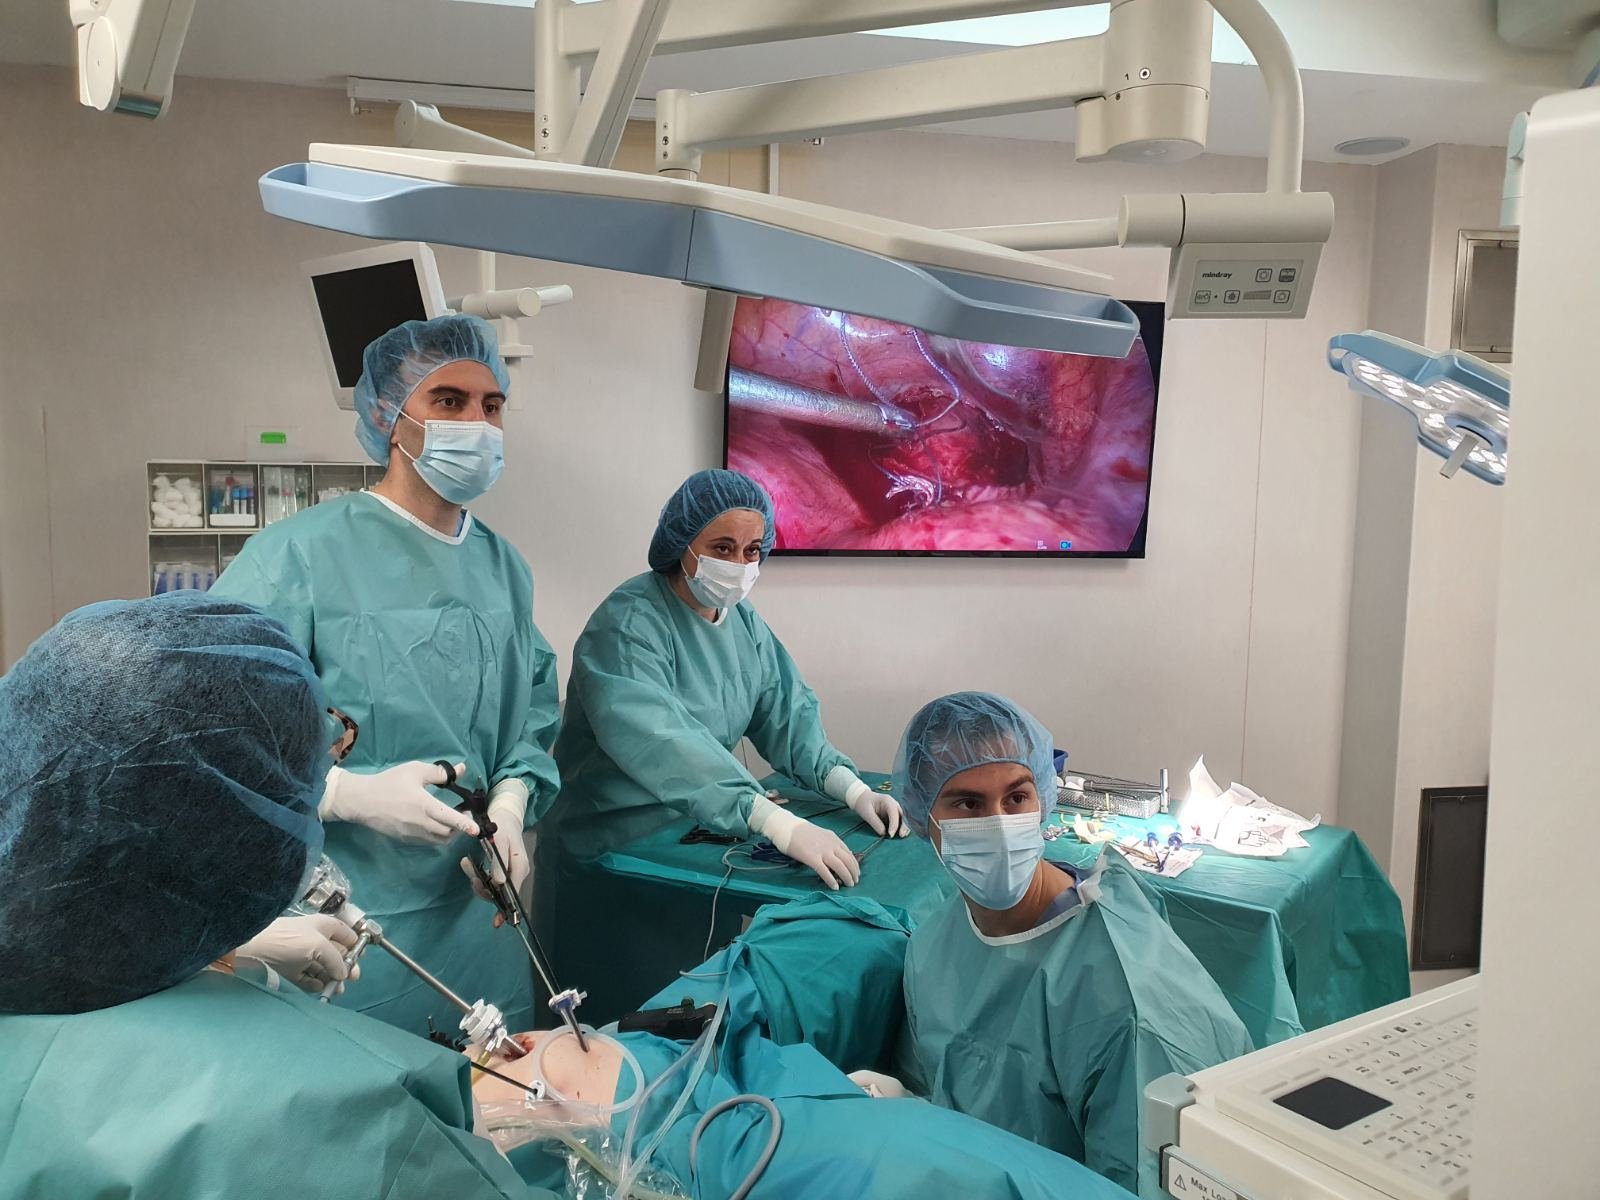 RISE OF THE ENDOSCOPIC SURGERY AT HOSPITAL PLODNOST” class=”wplp_thumb” /></span></span><span class=